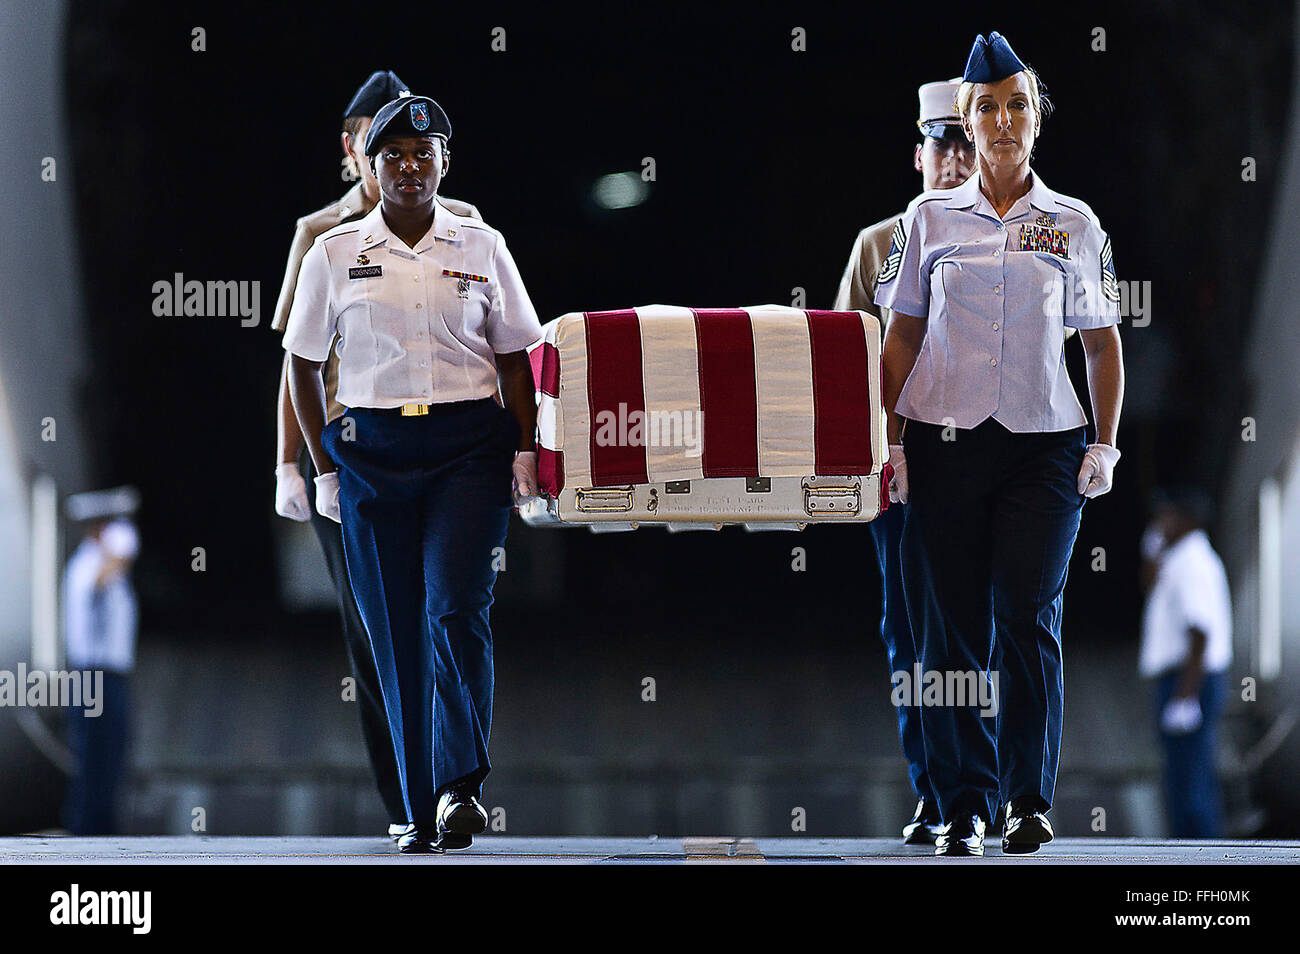 U.S. Army Pfc. Shantilla Robinson, (left front) U.S. Air Force Chief Master Sgt. Laura Noel, (right front) U.S. Navy Petty Officer 3rd Class India Davis (back left) and U.S. Marine Cassie McDole (back right) escort a flag-draped transfer case from a U.S. Air Force C-17 Globemaster III during the U.S. Joint POW/MIA Accounting Command Arrival Ceremony, Nov. 30, 2012, at Joint Base Pearl Harbor-Hickam. Stock Photo